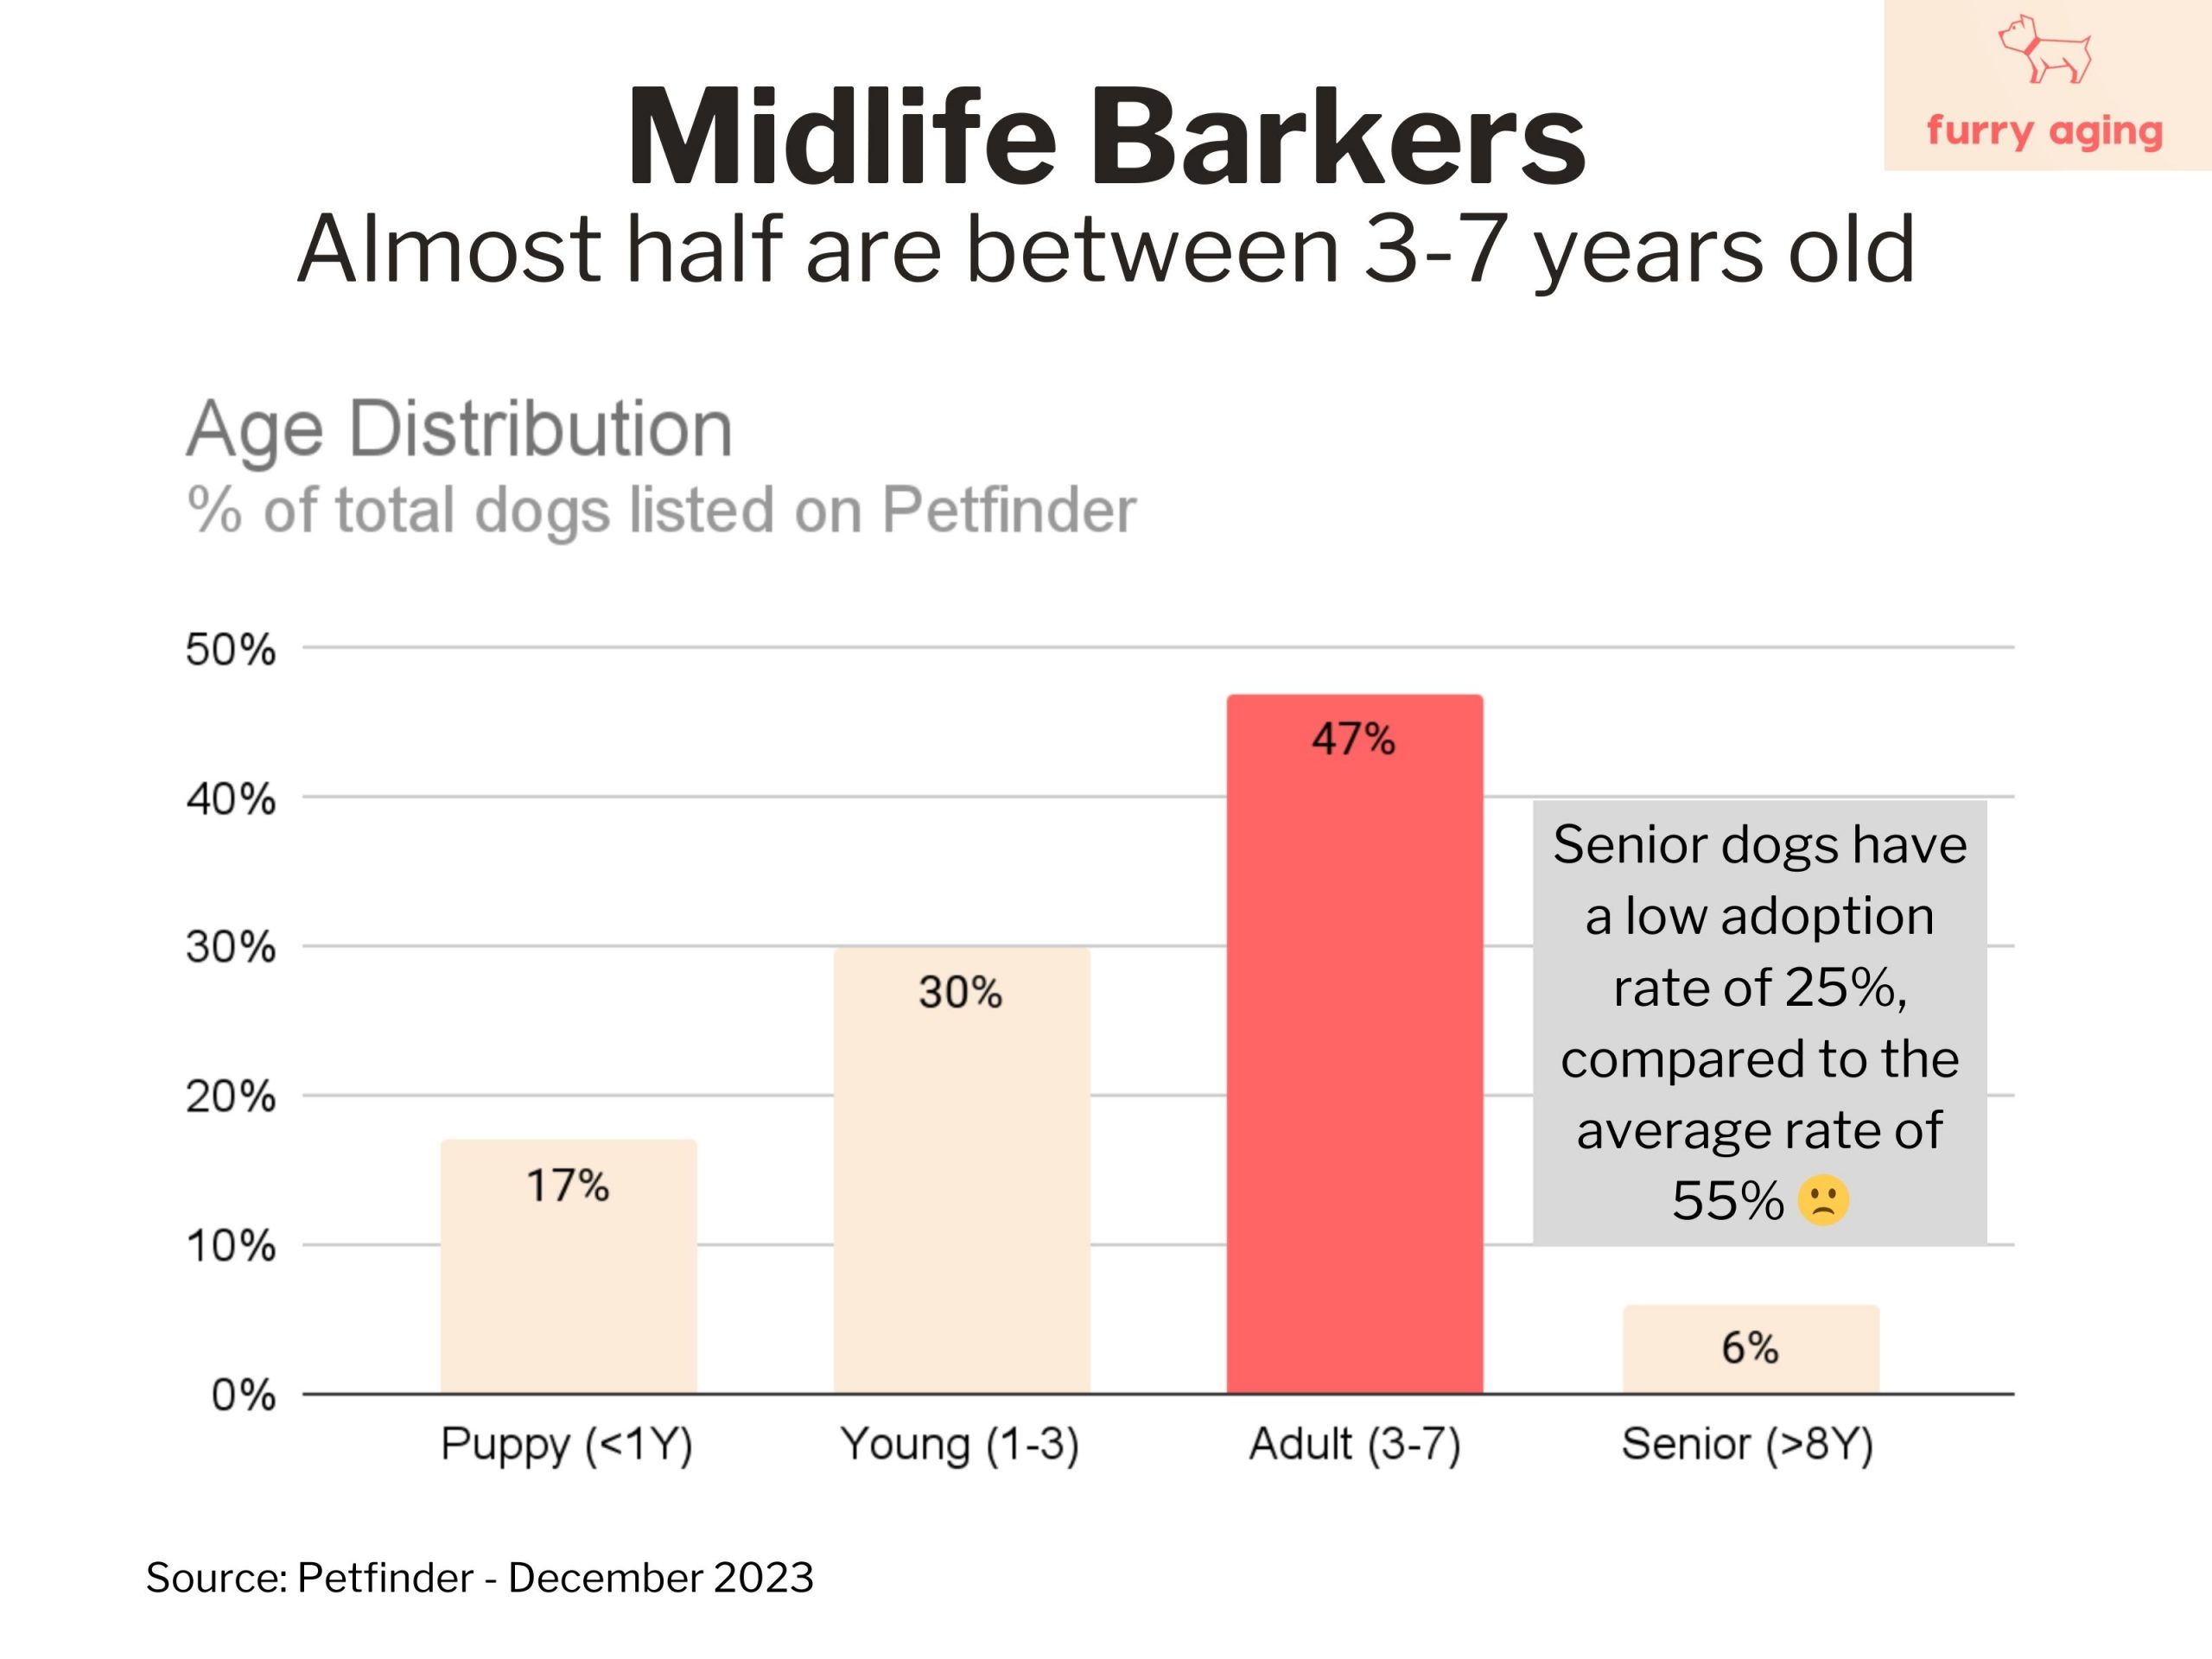 Percentage of dogs per age group